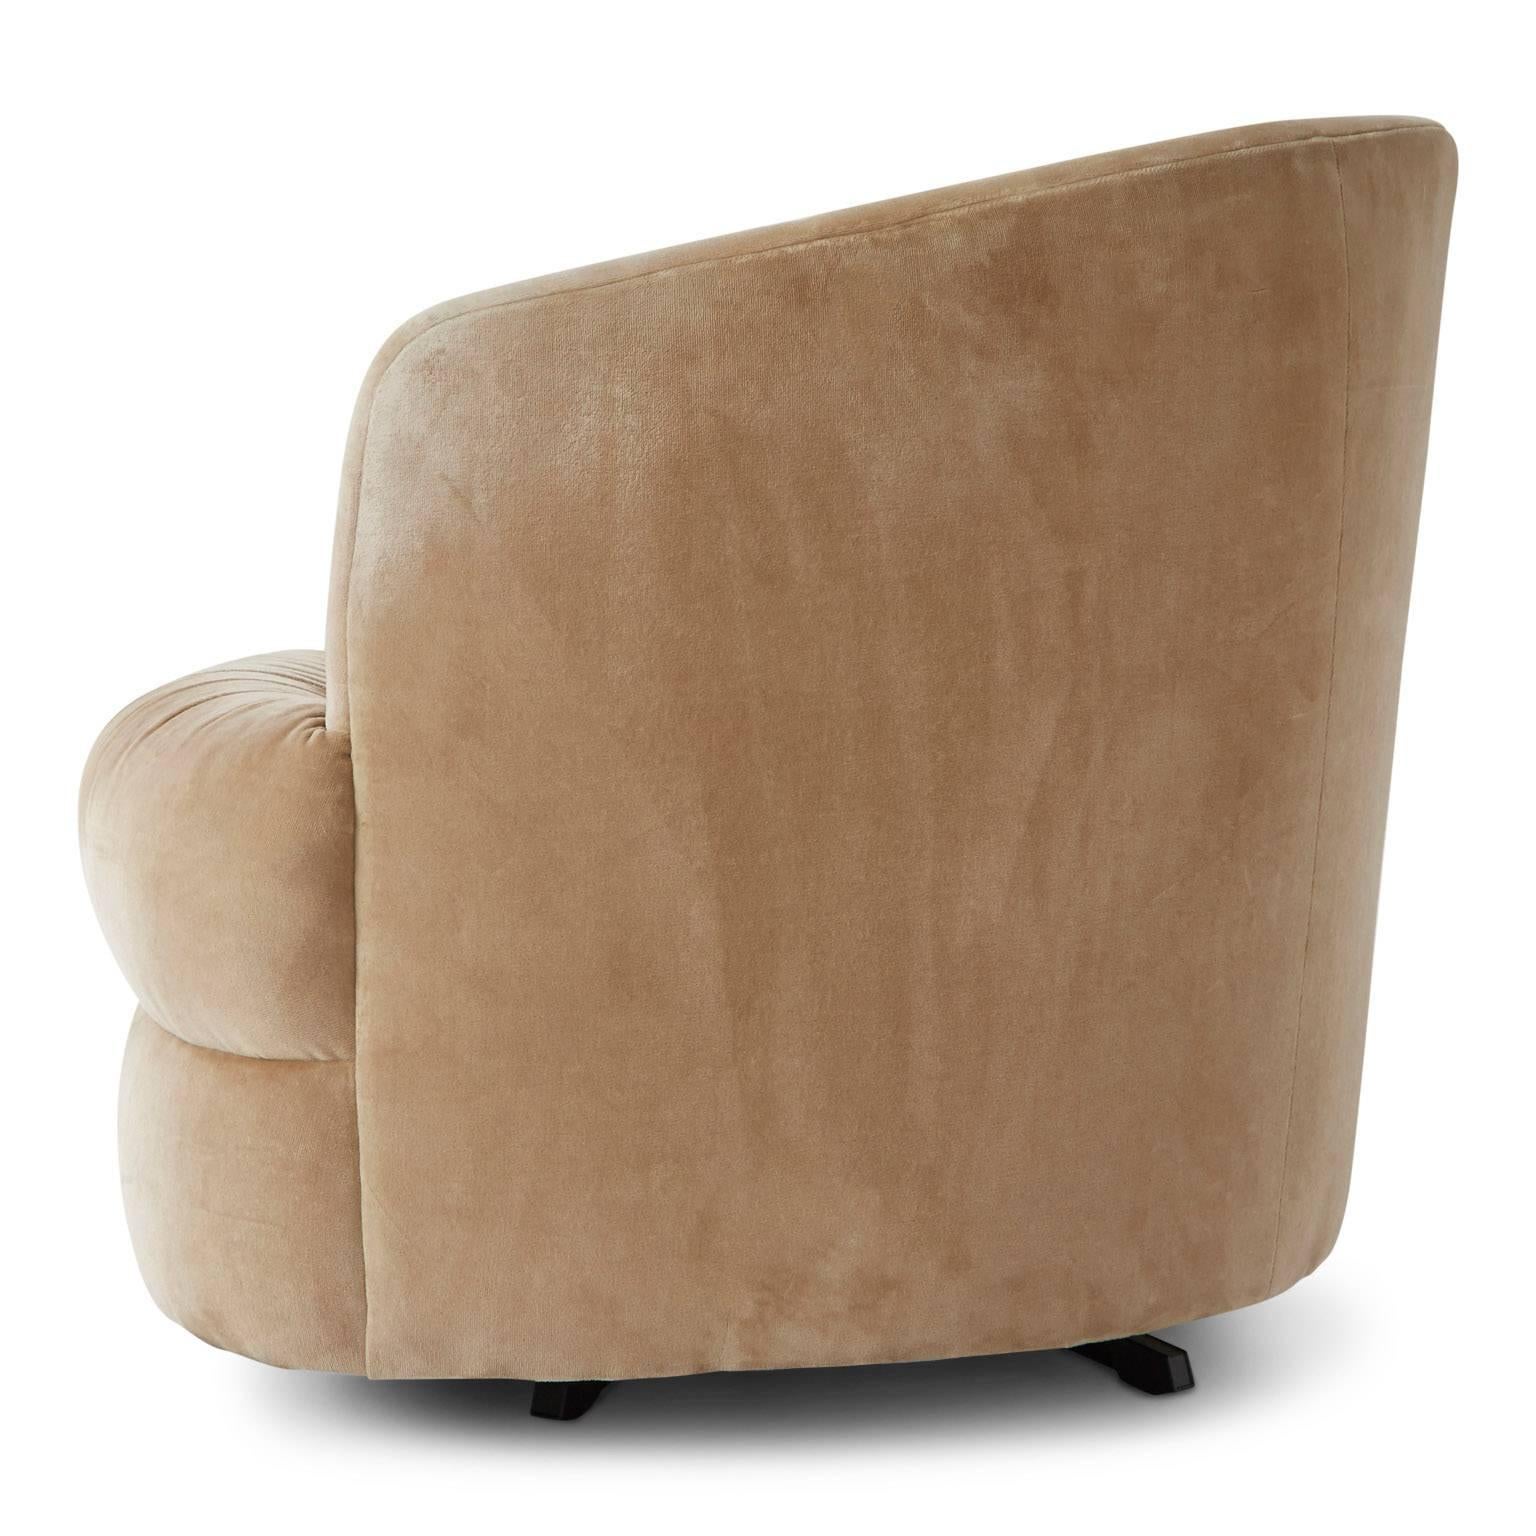 Attributed to Steve Chase, this Milo Baughman style swivel barrel chair upholstered in a stylish, neutral shade of buff velvet with elegant ruche details, on a black pronged base. This Mid-Century Modern piece could be utilized as a lounge, club,